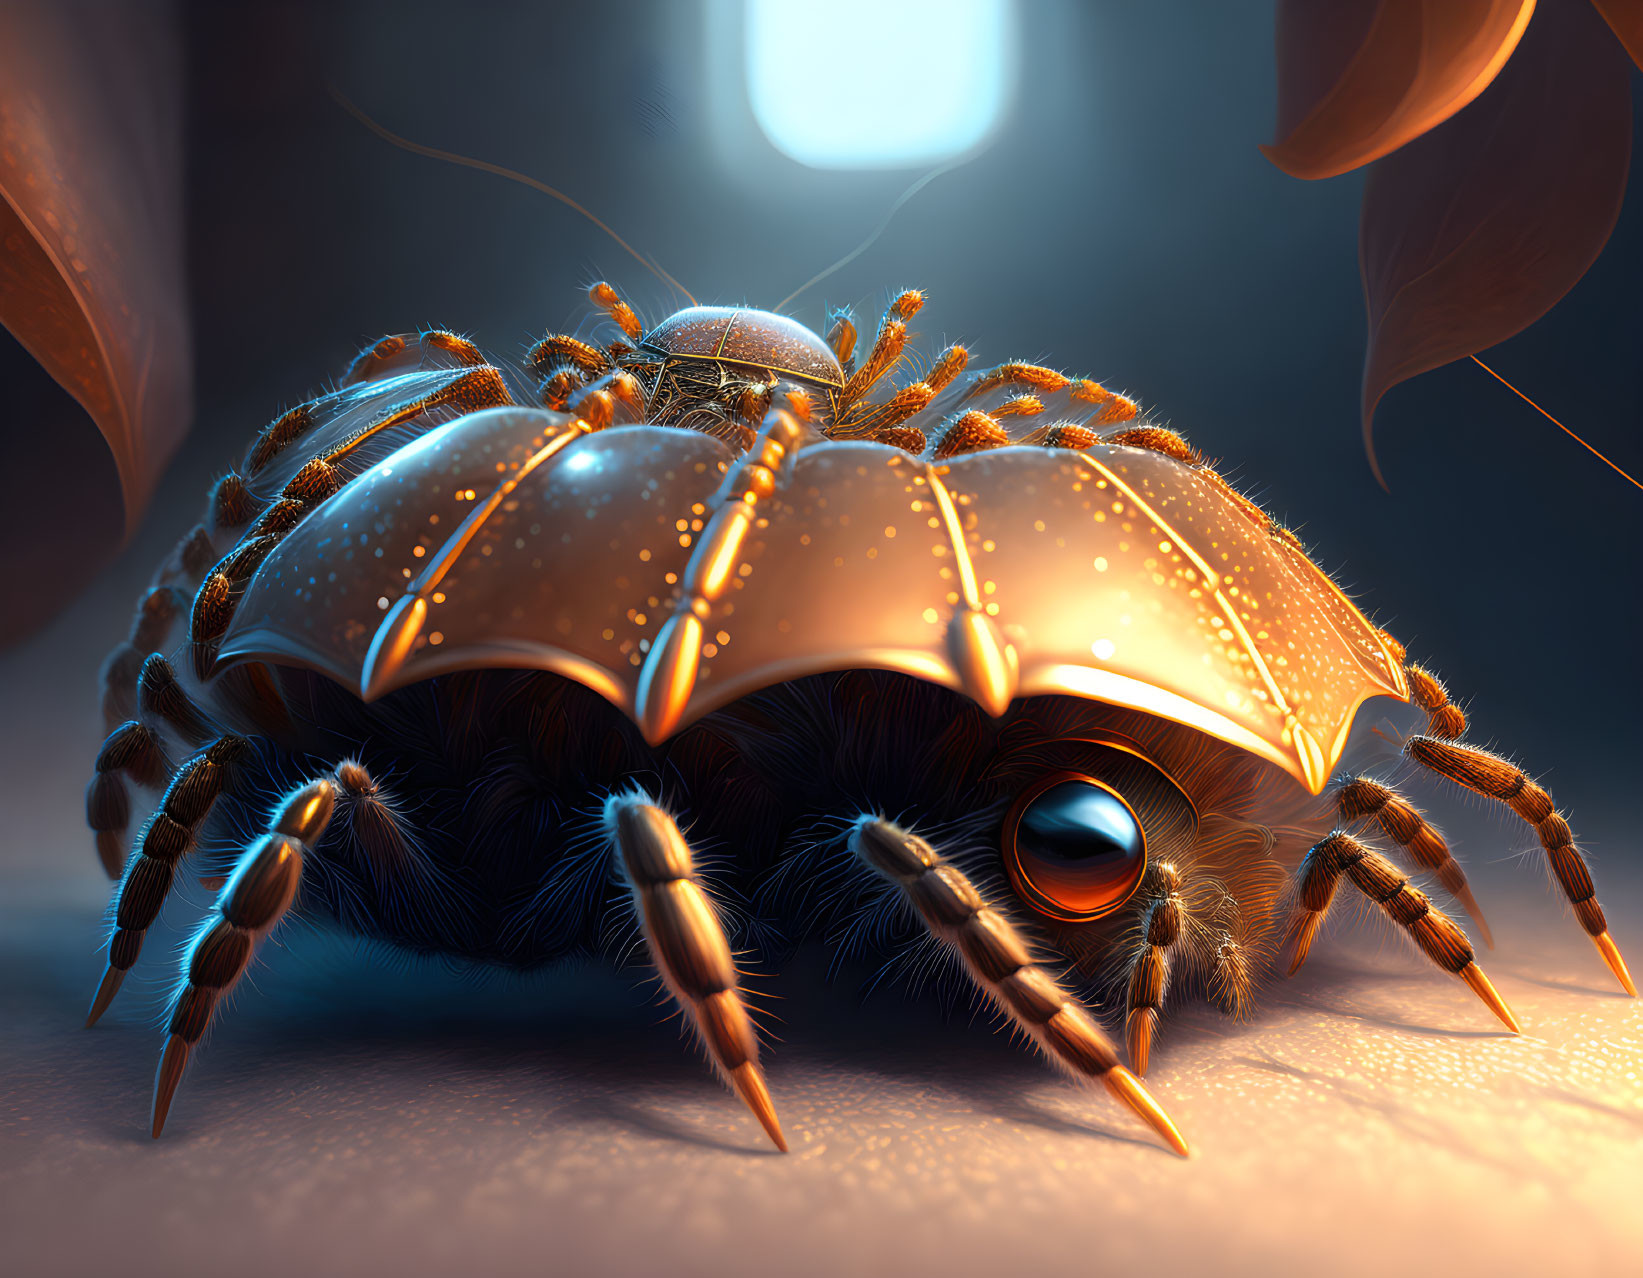 Detailed Stylized Beetle Image with Shimmering Carapace